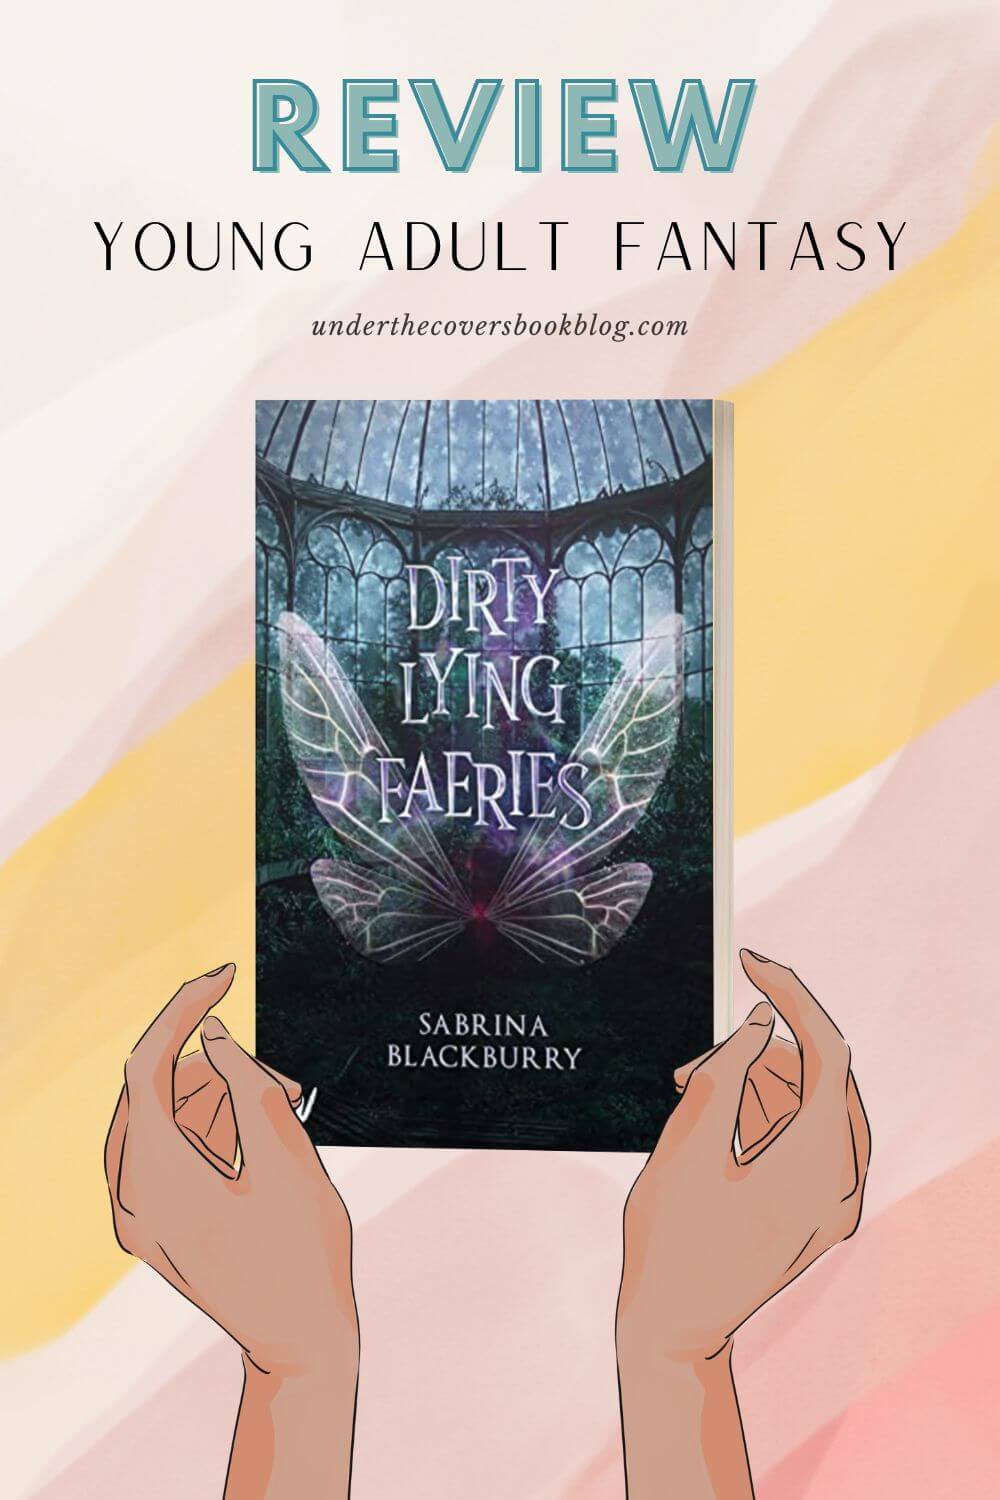 Young Adult Fantasy Review: Dirty Lying Faeries by Sabrina Blackburry